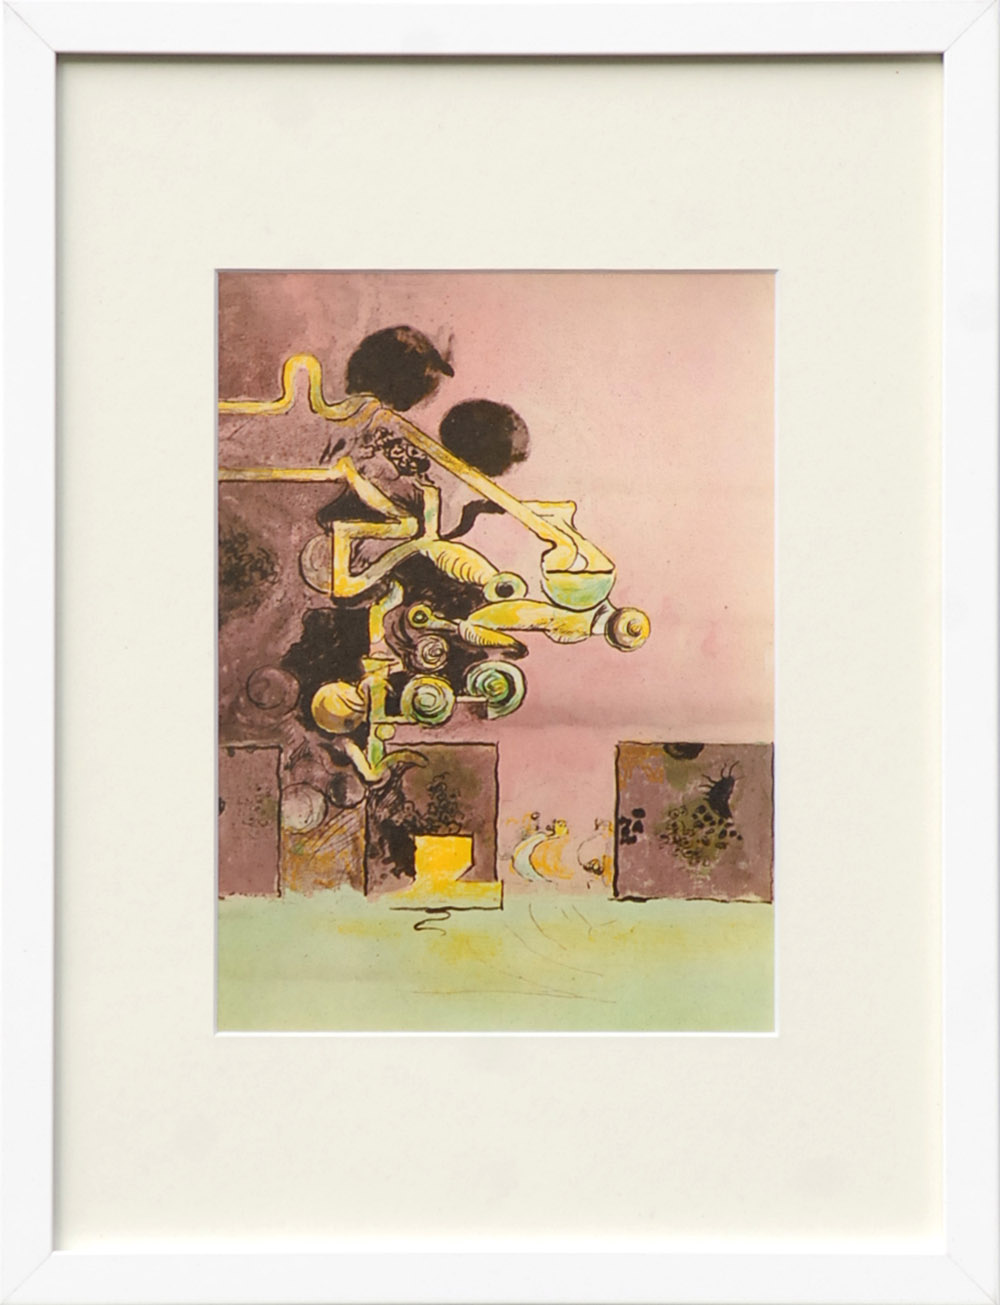 GRAHAM SUTHERLAND, 'Forms', lithograph in colours, edition: 1000, 1979, printed by Poligrafa,